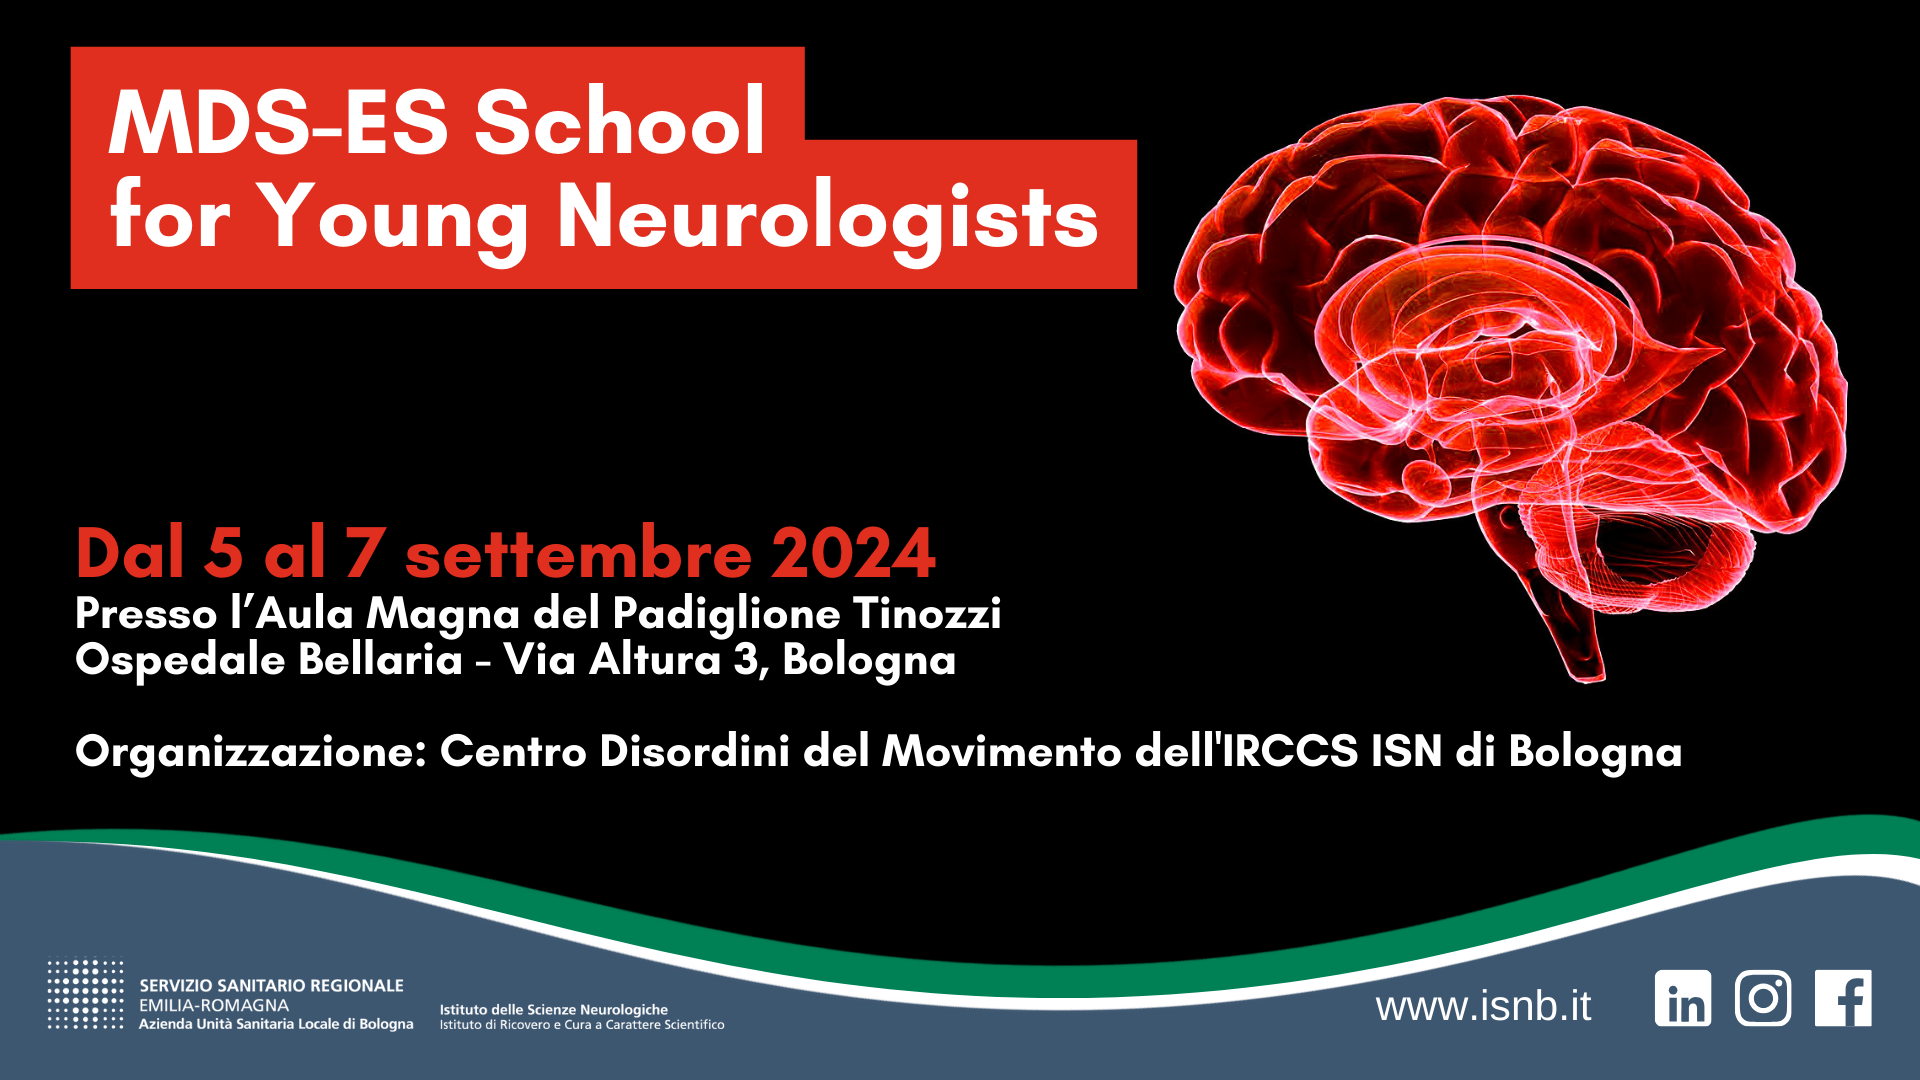 MDS-ES School for Young Neurologist